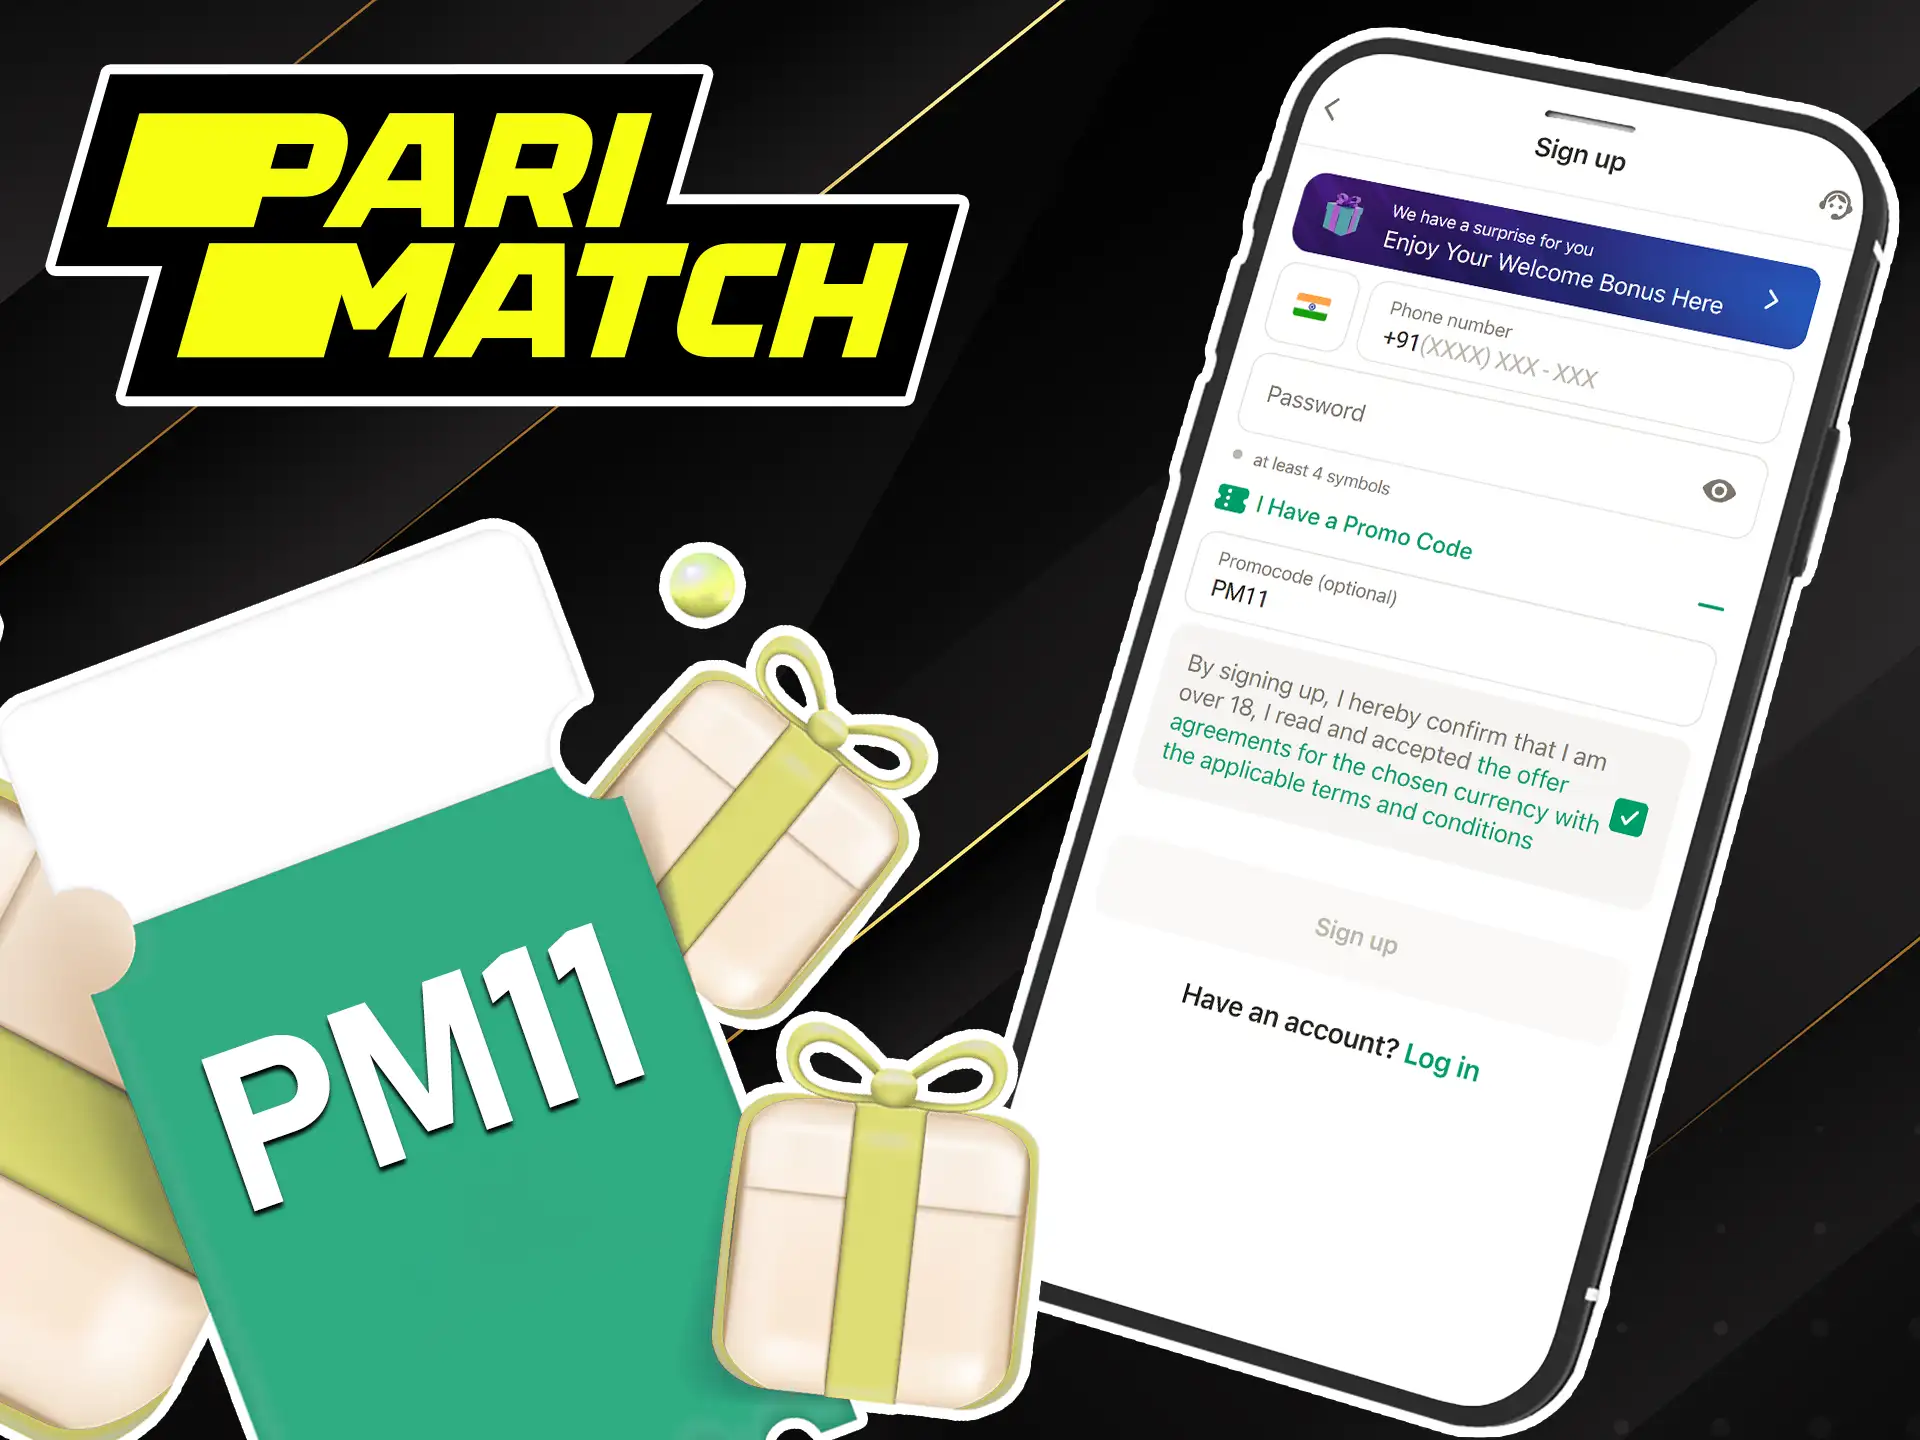 You can redeem the Parimatch promo code no matter what device you use.